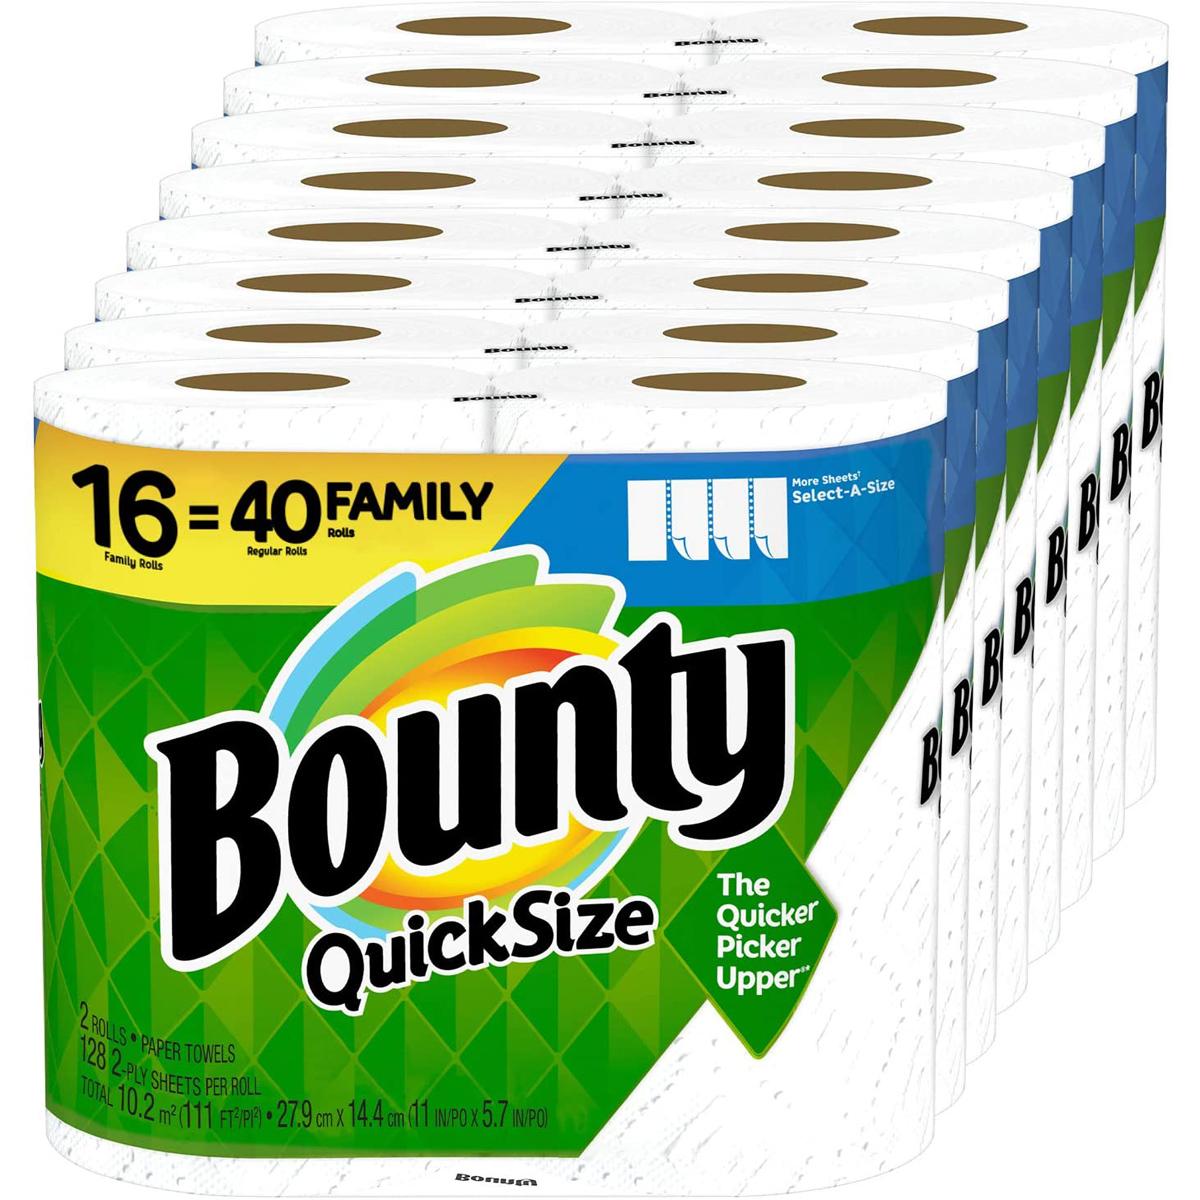 28 Bounty Quick-Size Paper Towels for $40.25 Shipped